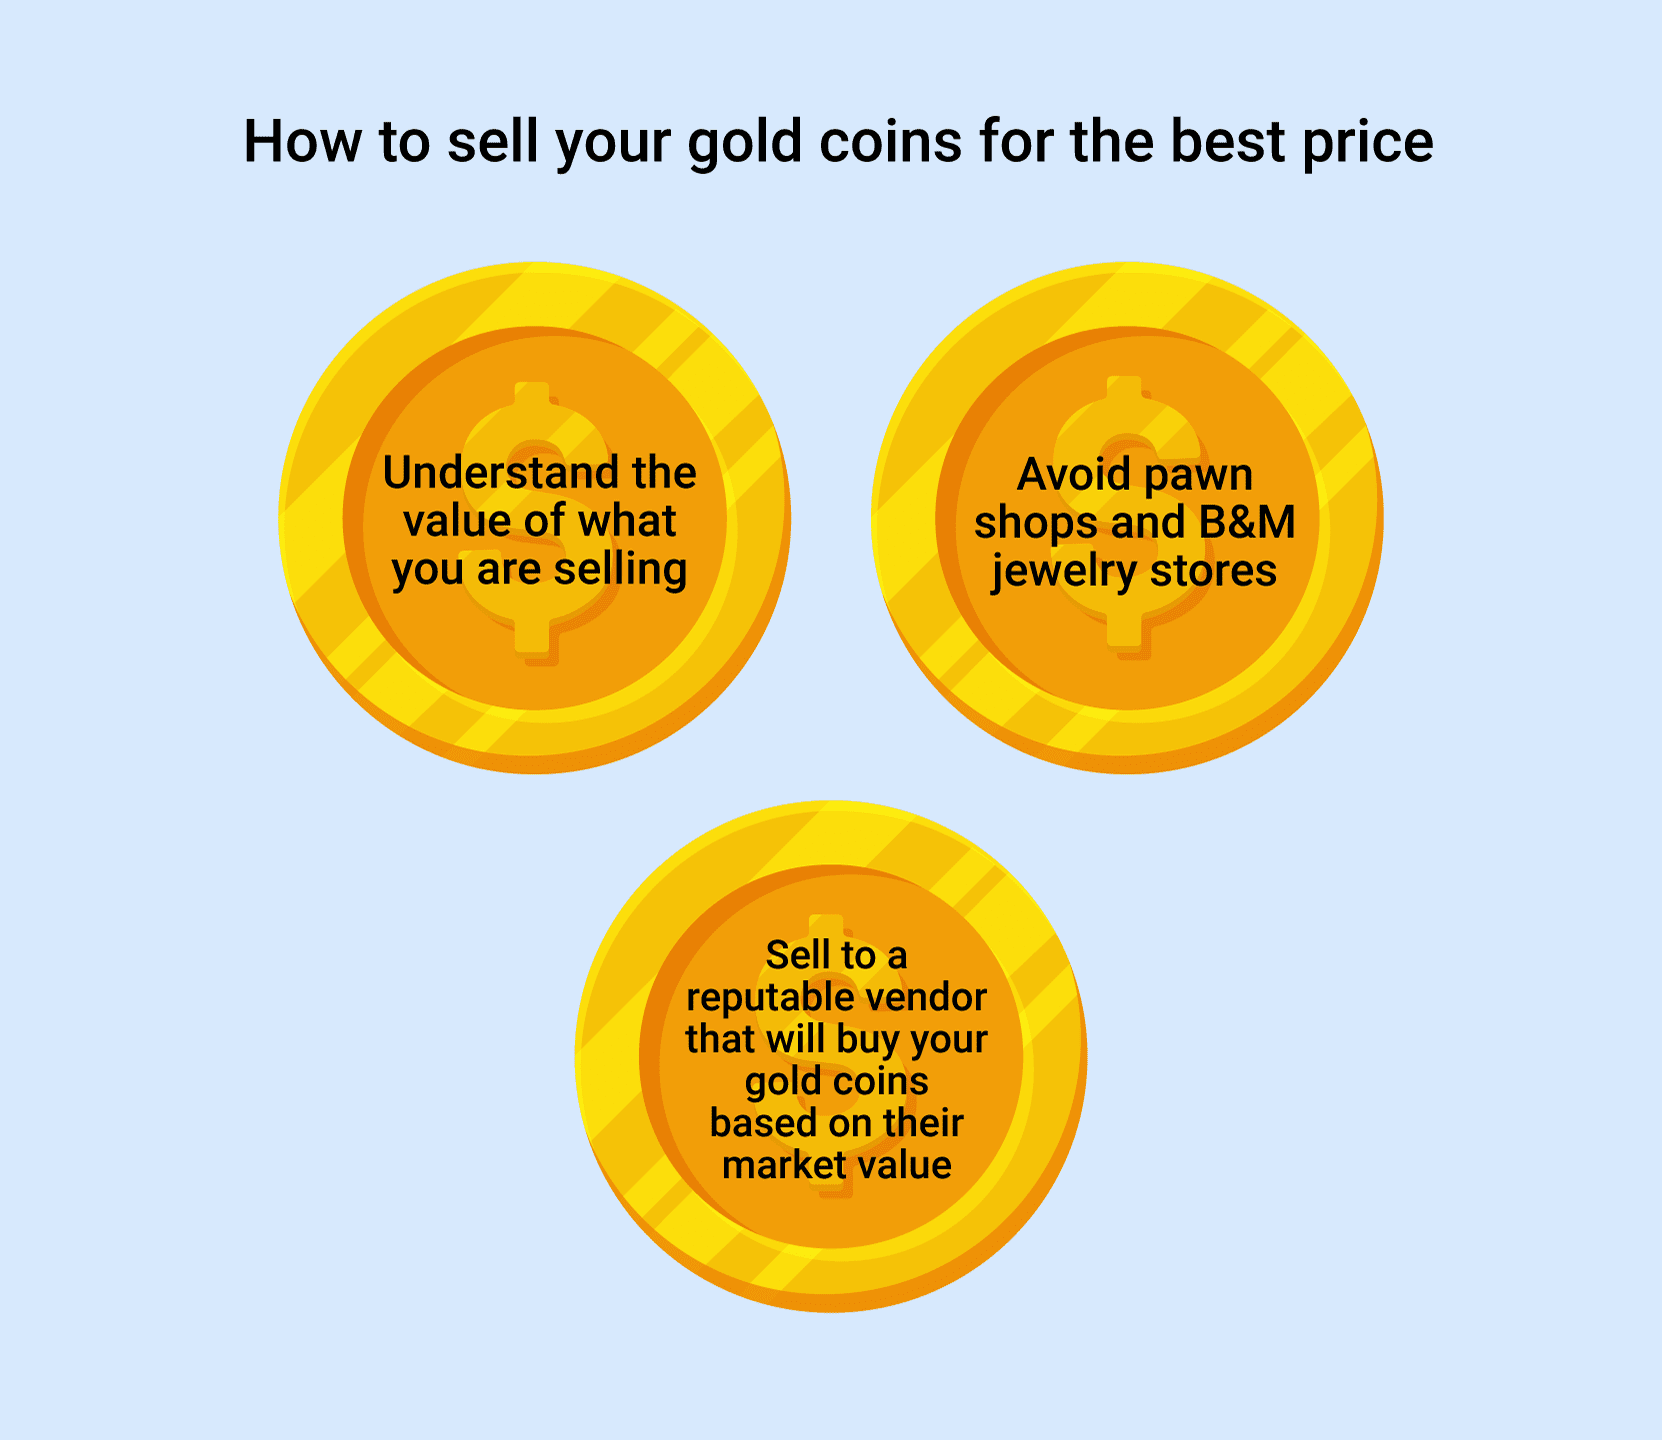 3 Ways to Sell Gold Coins - wikiHow